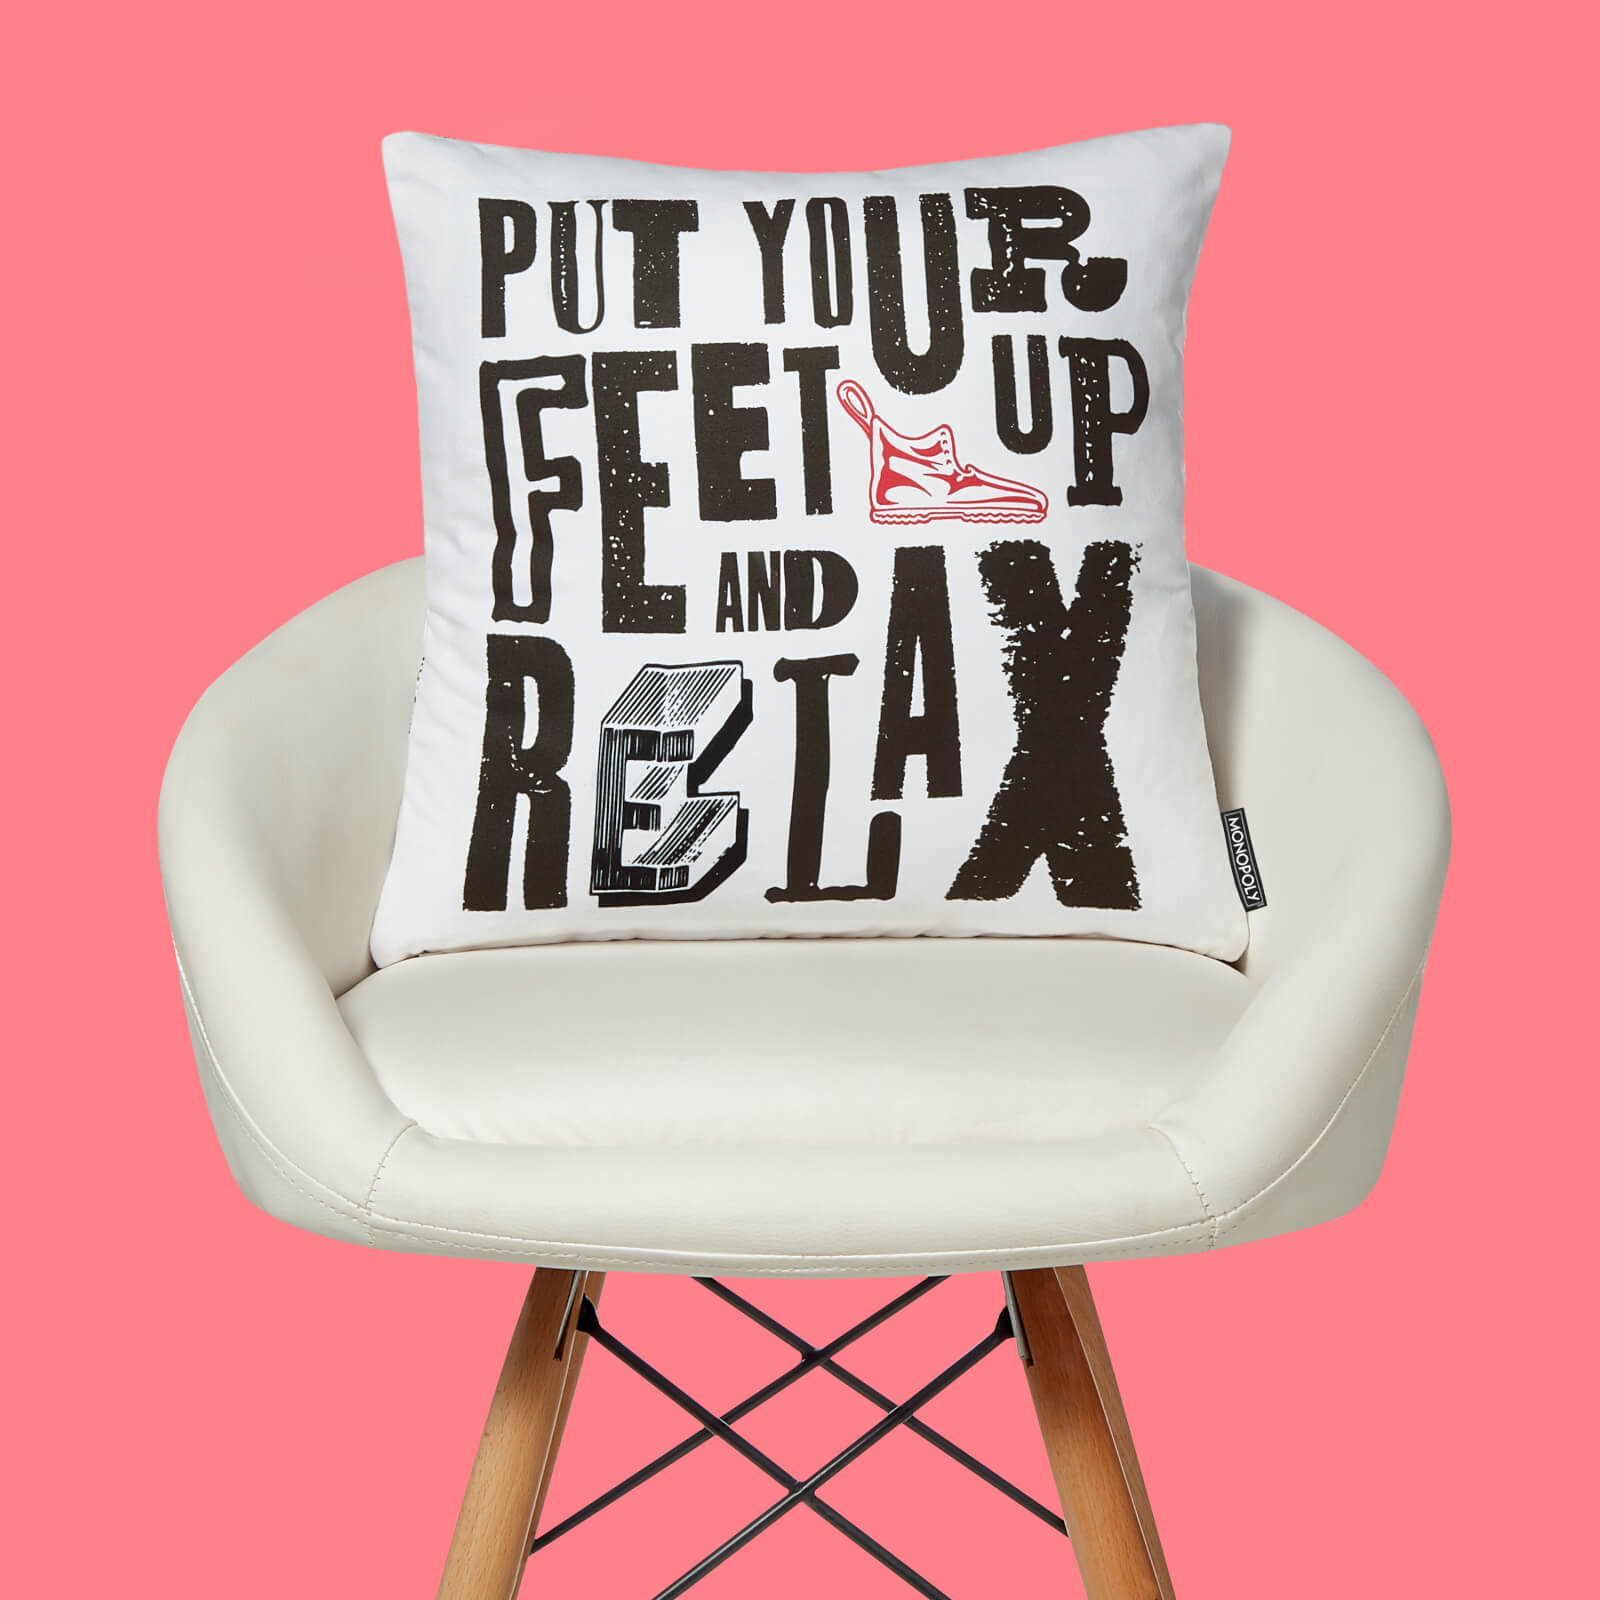 Monopoly Feet Up And Relax Square Cushion - 40x40cm - Soft Touch